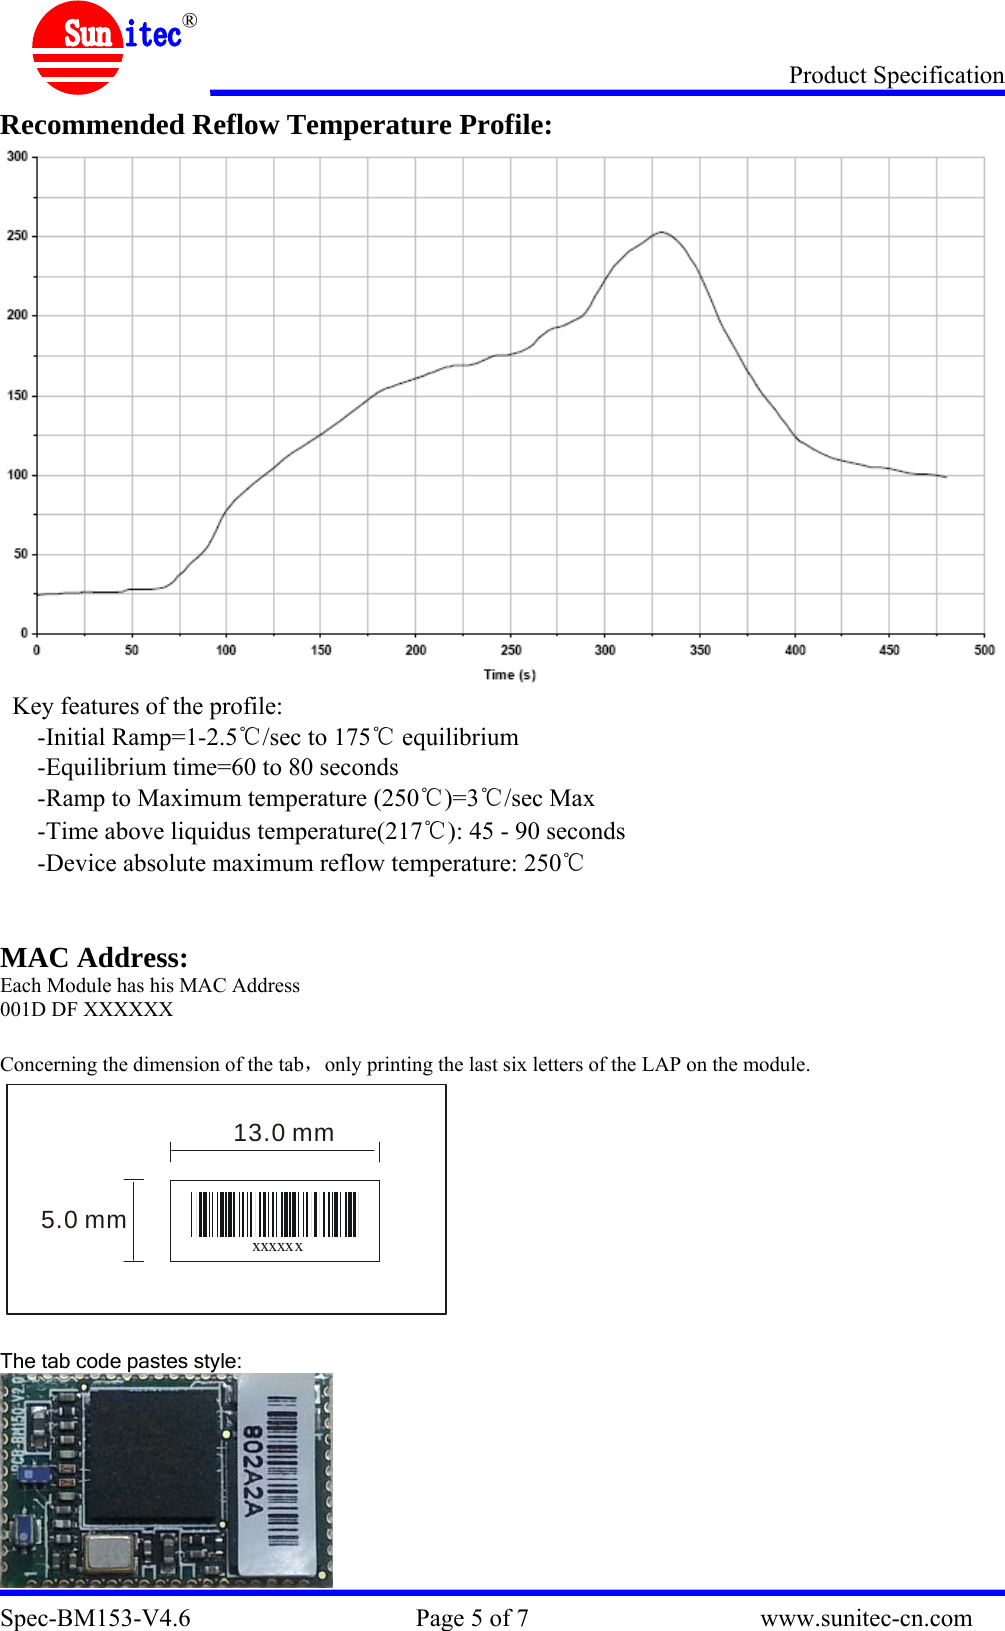 Product Specification Spec-BM153-V4.6                                    Page 5 of 7                                     www.sunitec-cn.com  ® Recommended Reflow Temperature Profile:  Key features of the profile: -Initial Ramp=1-2.5℃/sec to 175℃ equilibrium -Equilibrium time=60 to 80 seconds -Ramp to Maximum temperature (250℃)=3℃/sec Max -Time above liquidus temperature(217℃): 45 - 90 seconds -Device absolute maximum reflow temperature: 250℃   MAC Address: Each Module has his MAC Address 001D DF XXXXXX  Concerning the dimension of the tab，only printing the last six letters of the LAP on the module. xxxxxx5.0 mm13.0 mm  The tab code pastes style:  